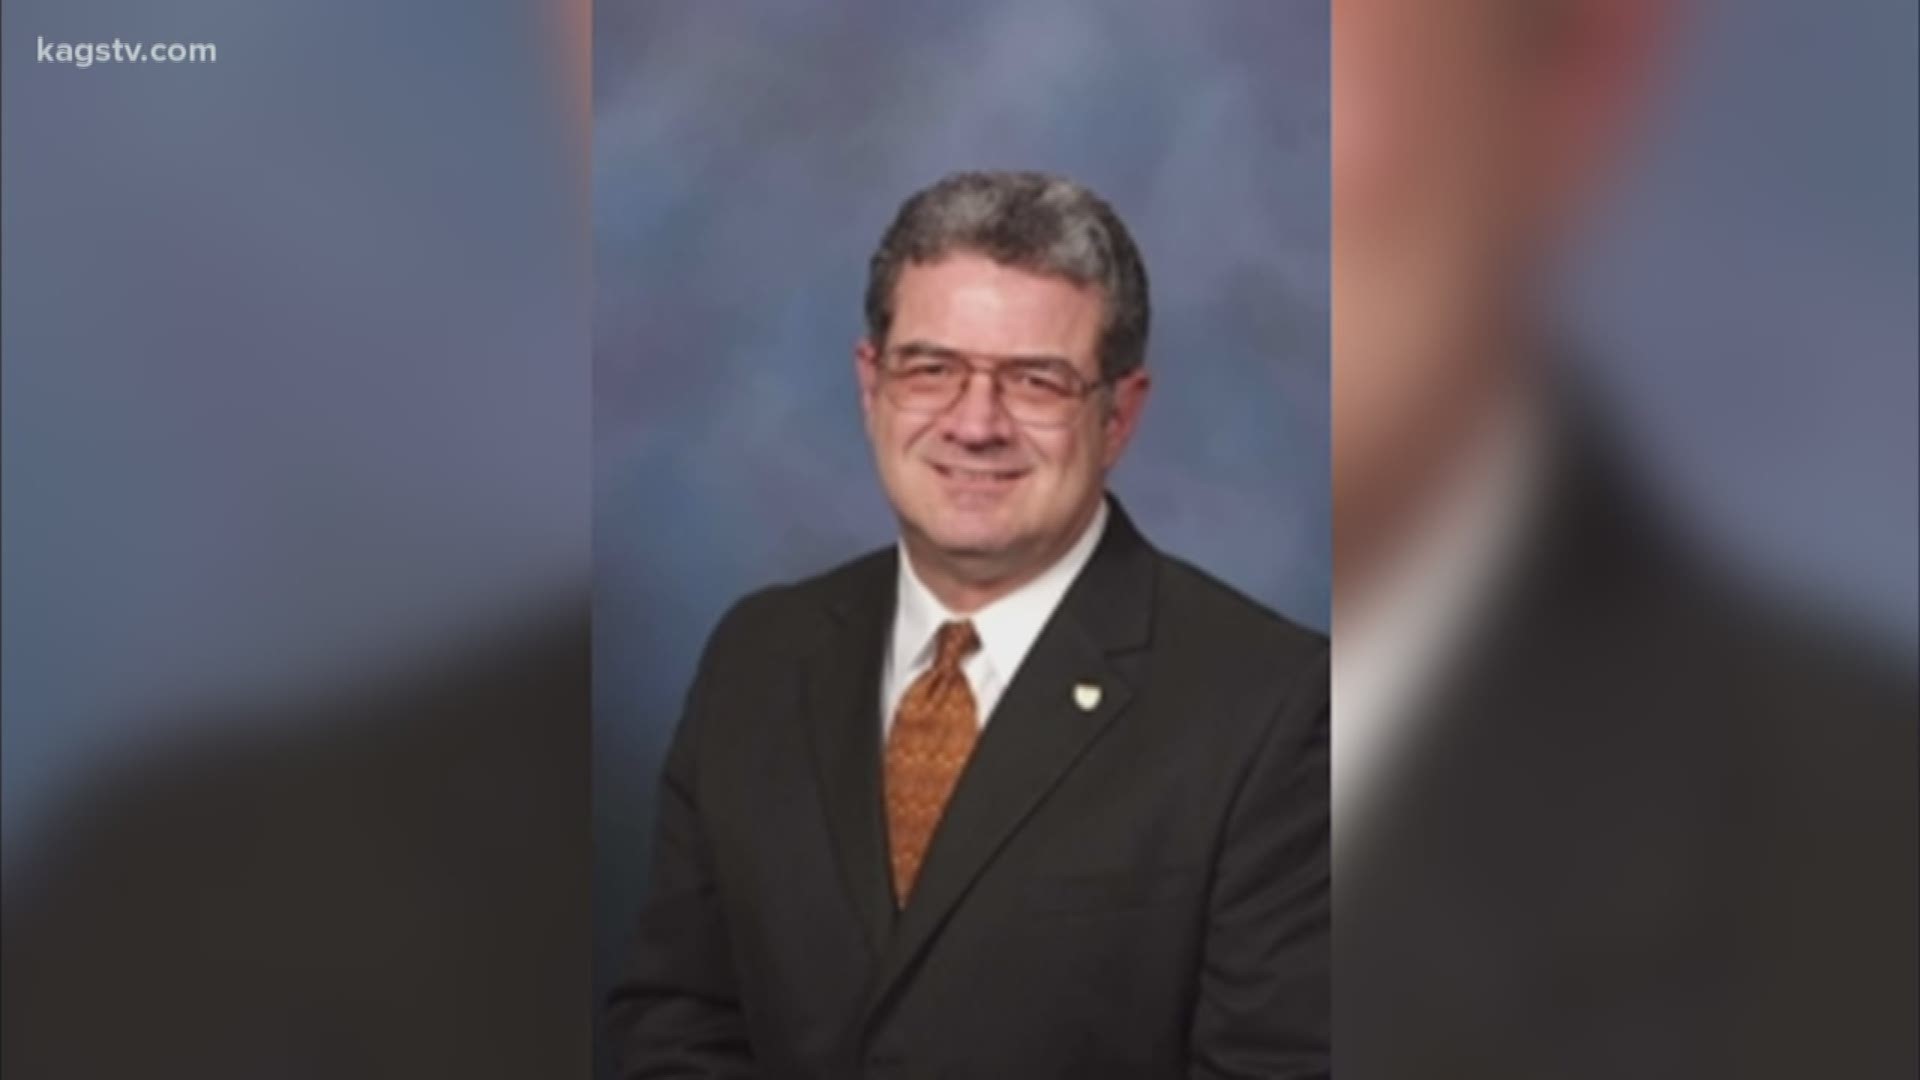 Sutherland resigned his position in June of 2019, shortly after being accused of inappropriate conduct.